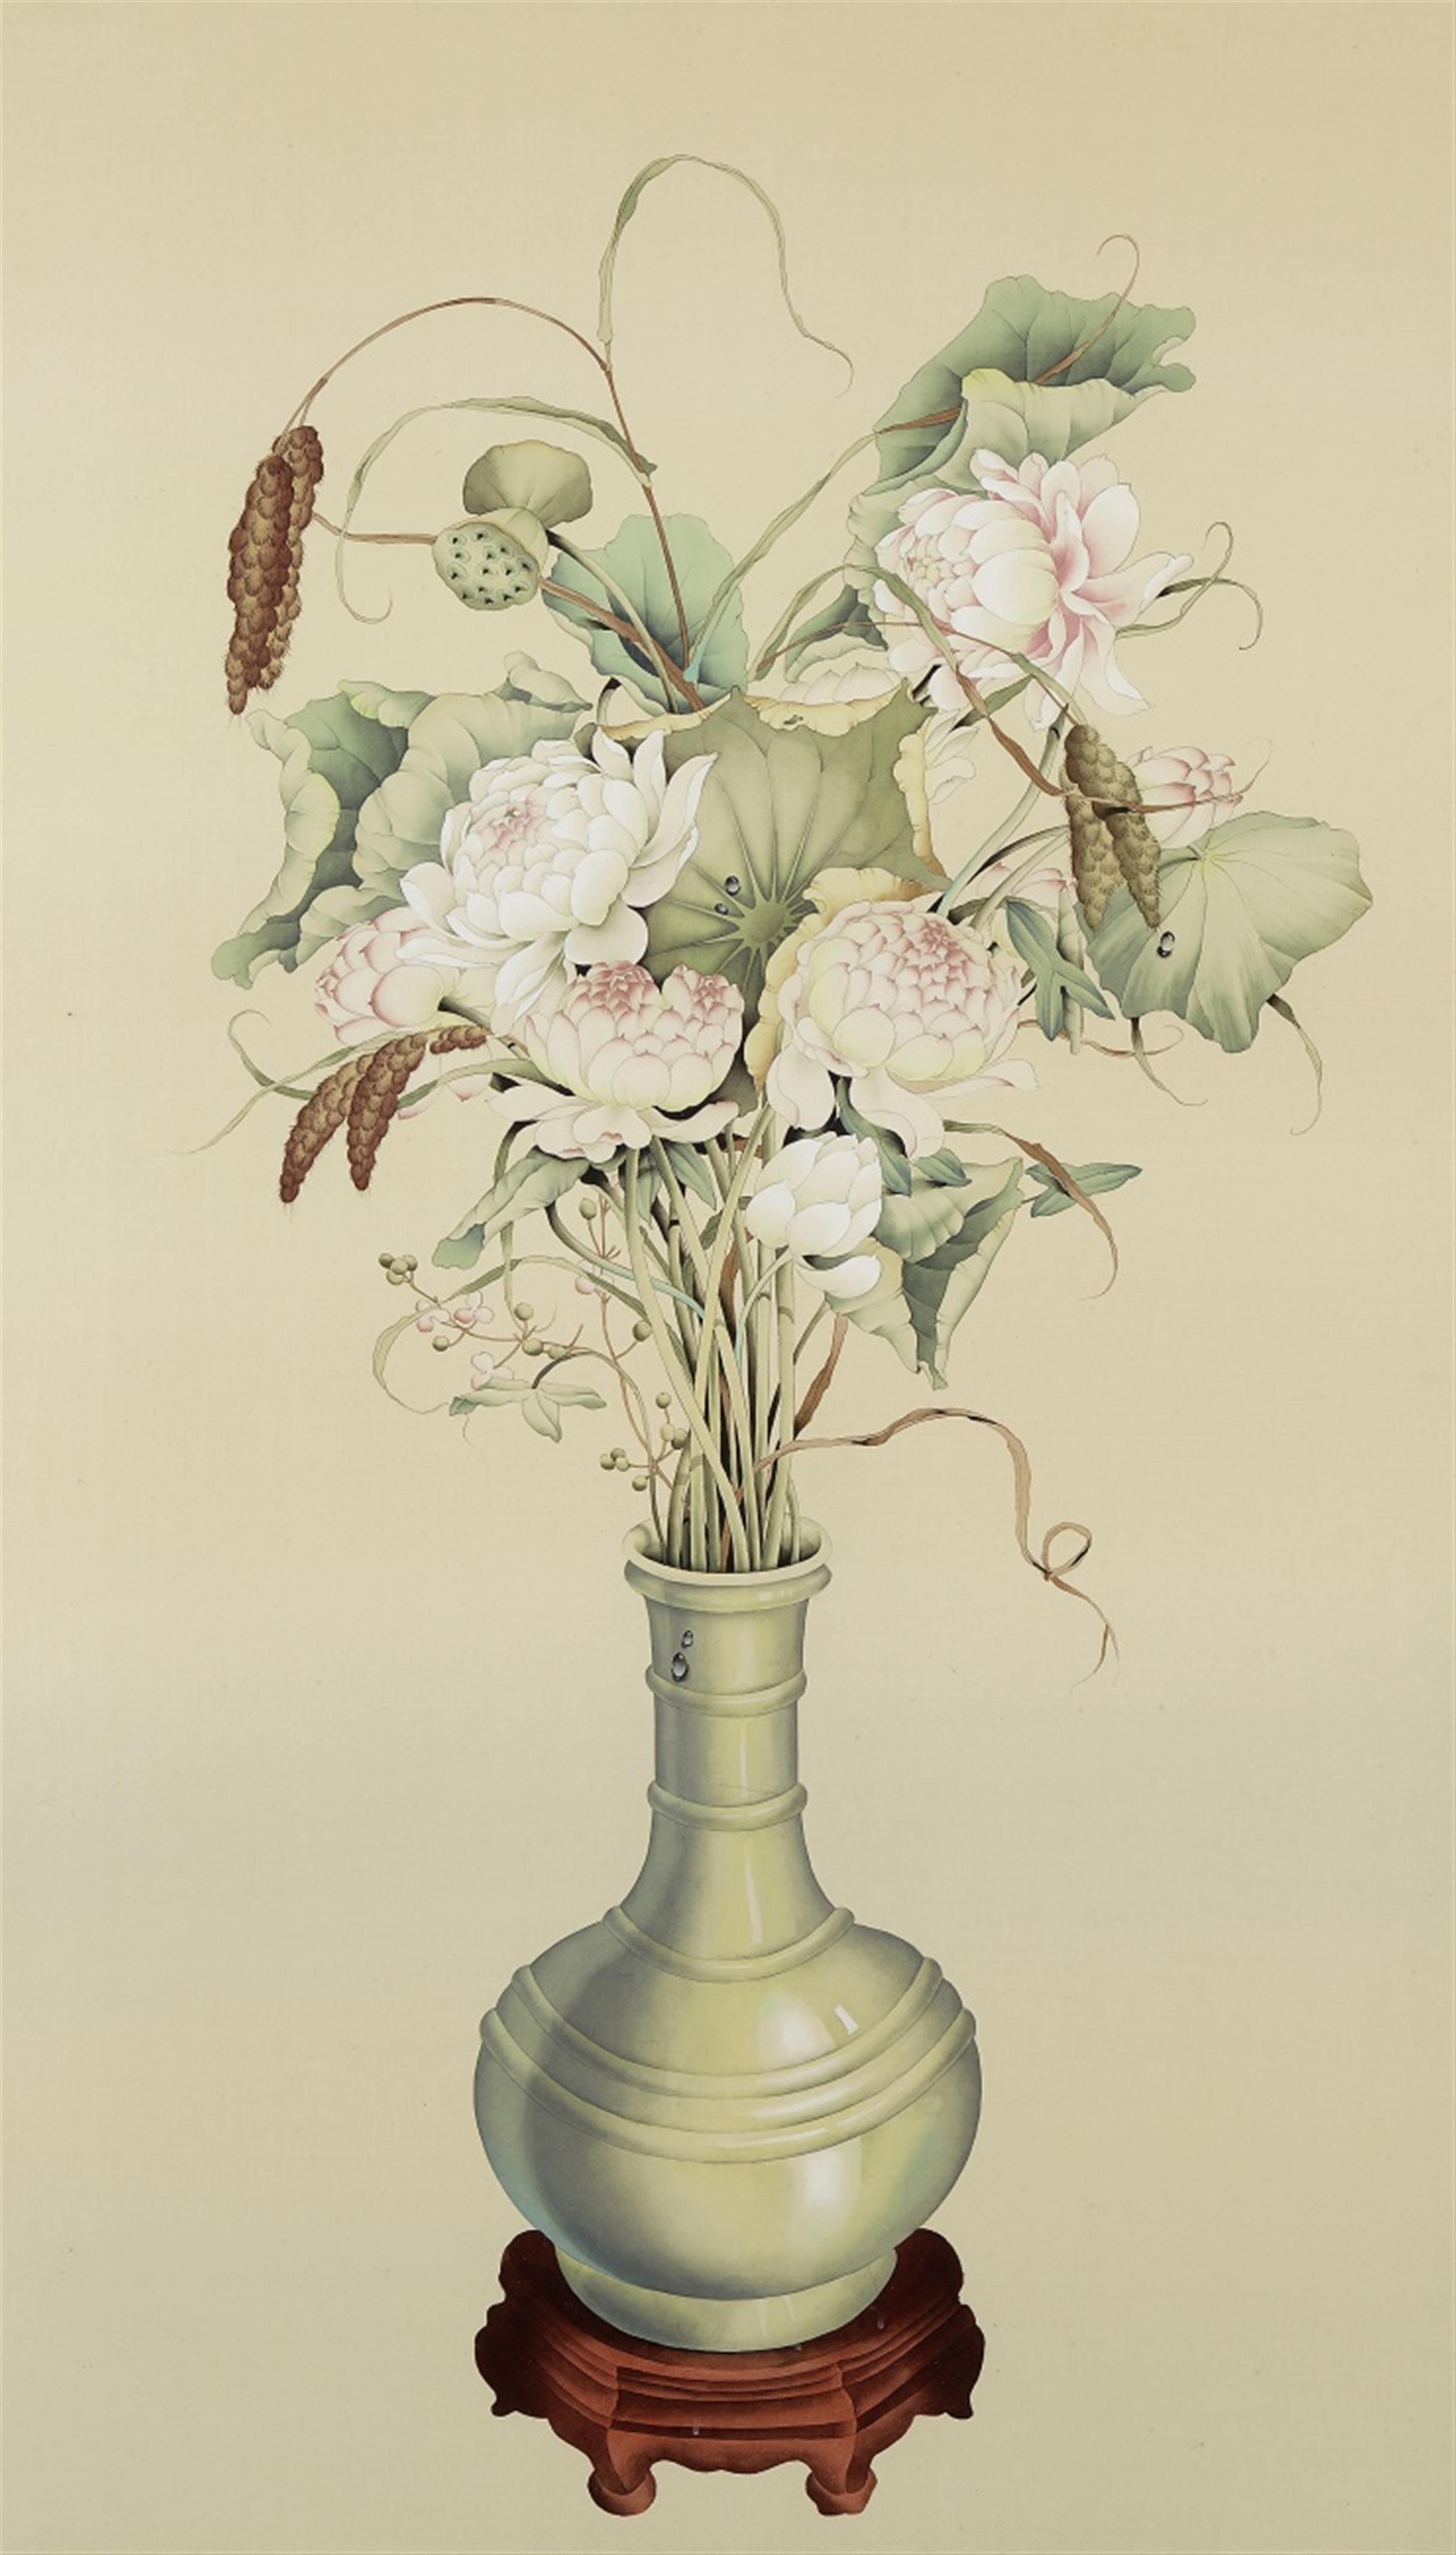 After Lang Shining (Giuseppe Castiglione) - A celadon vase with an arrangement of auspicious plants such as lotus and stalks of rice with ears of grain. Ink and colour on paper. With silk mounting, framed and glazed. - image-1